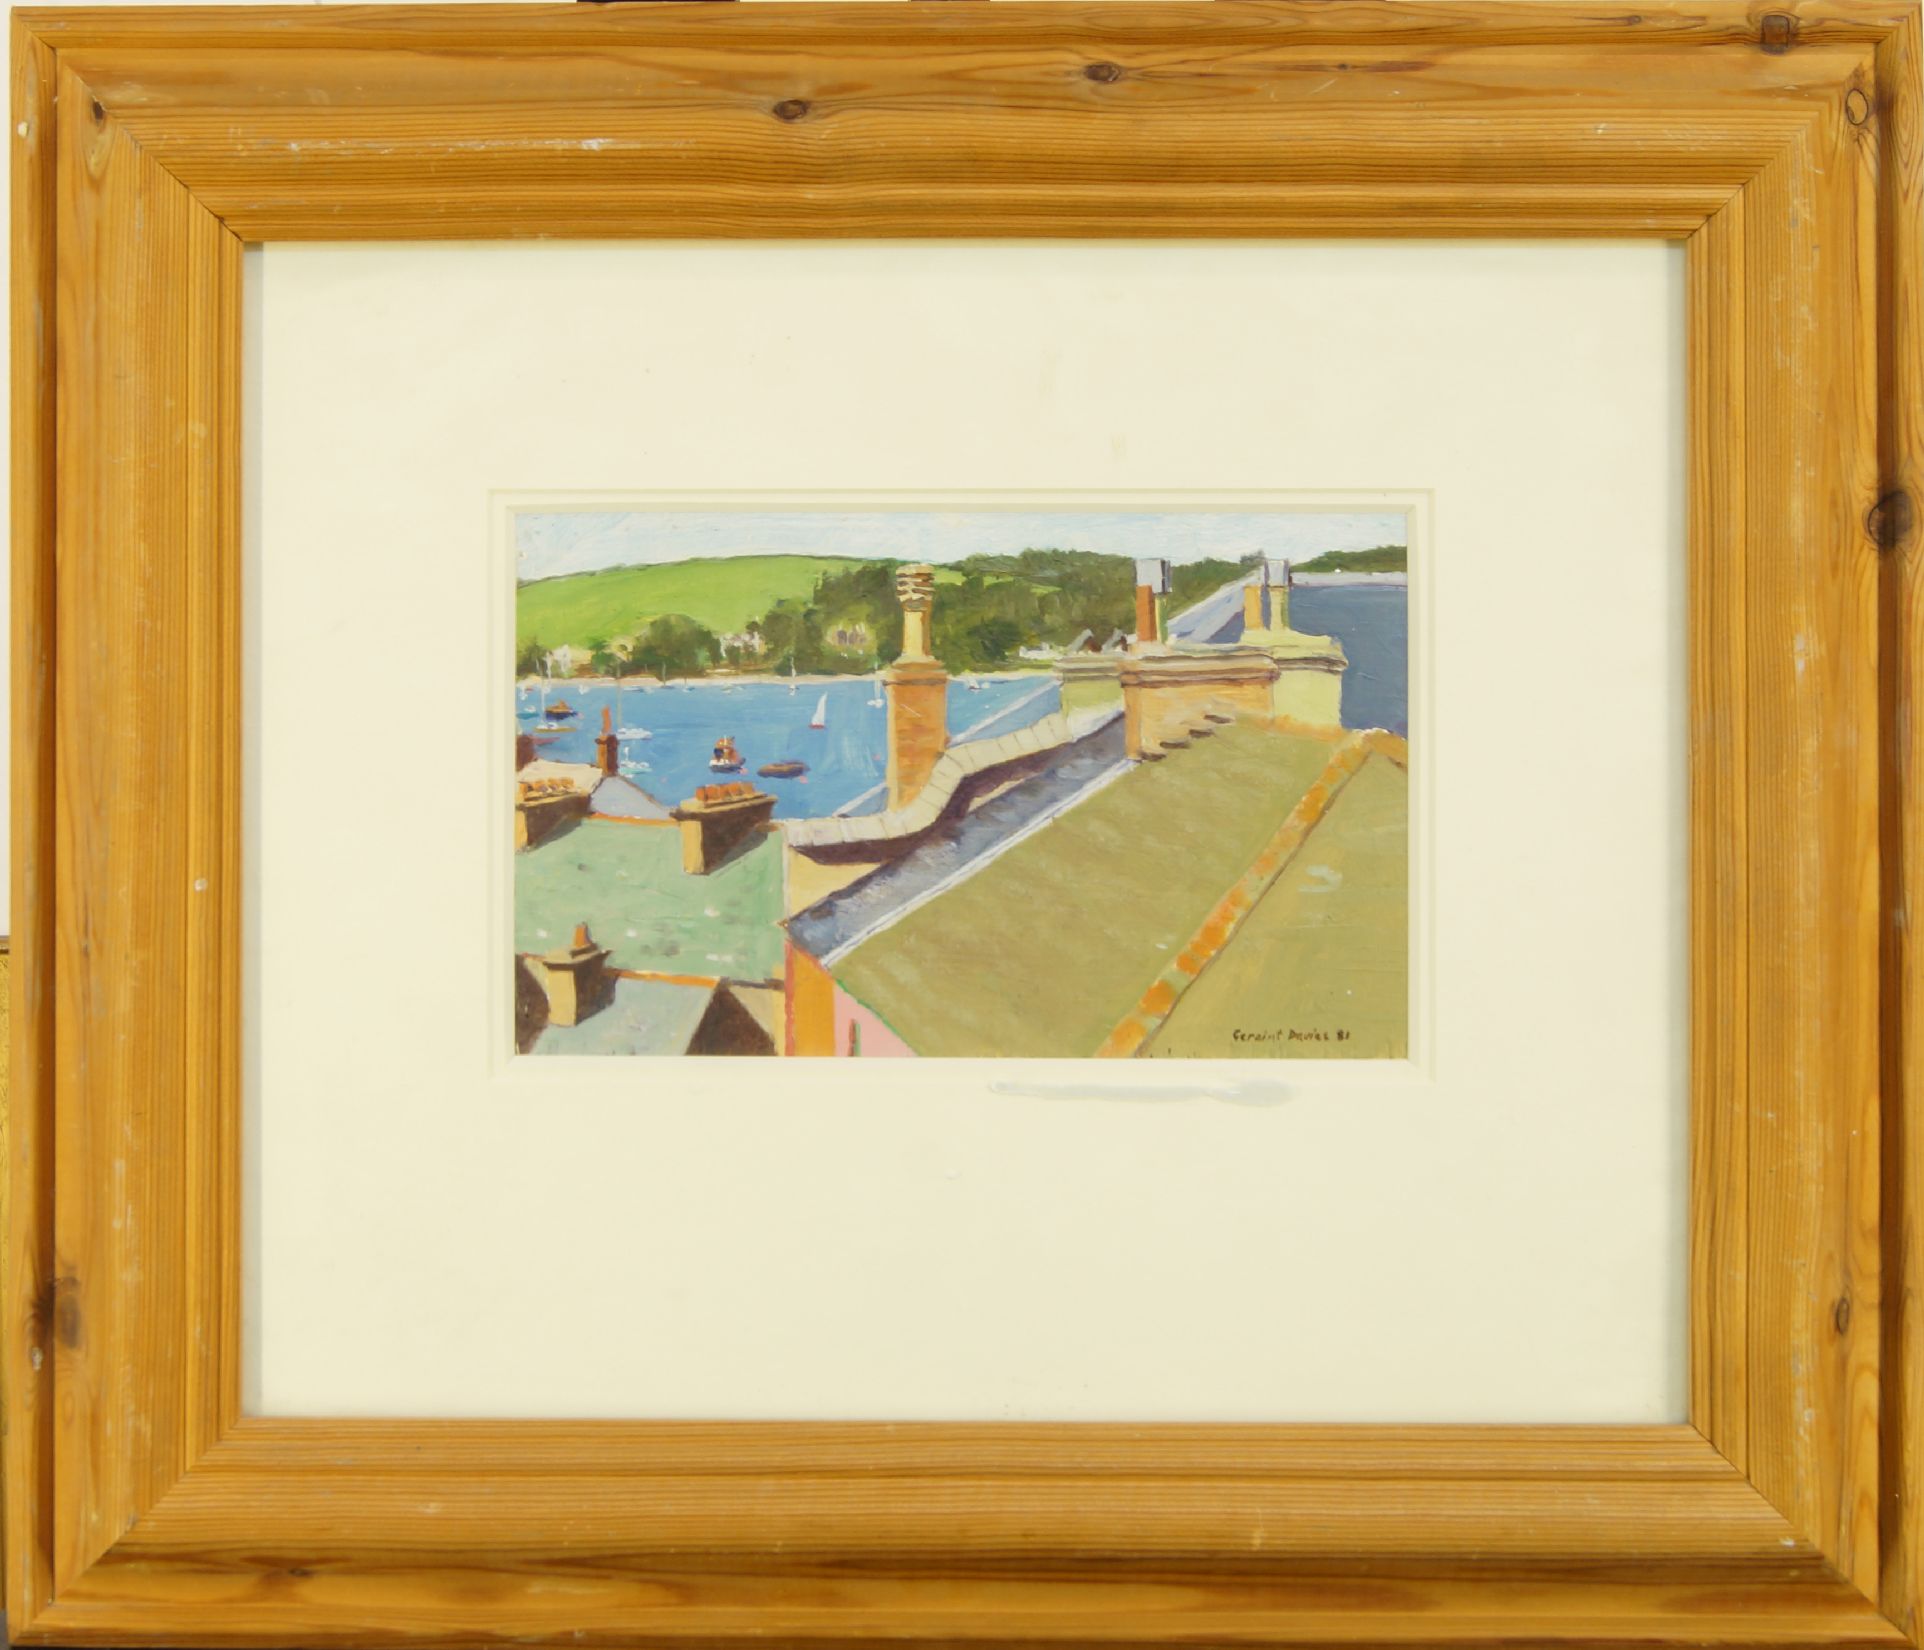 Geraint Davies, British, mid-late 20th century- View from Bar Road, Falmouth, Cornwall, 1981; oil on - Image 2 of 3